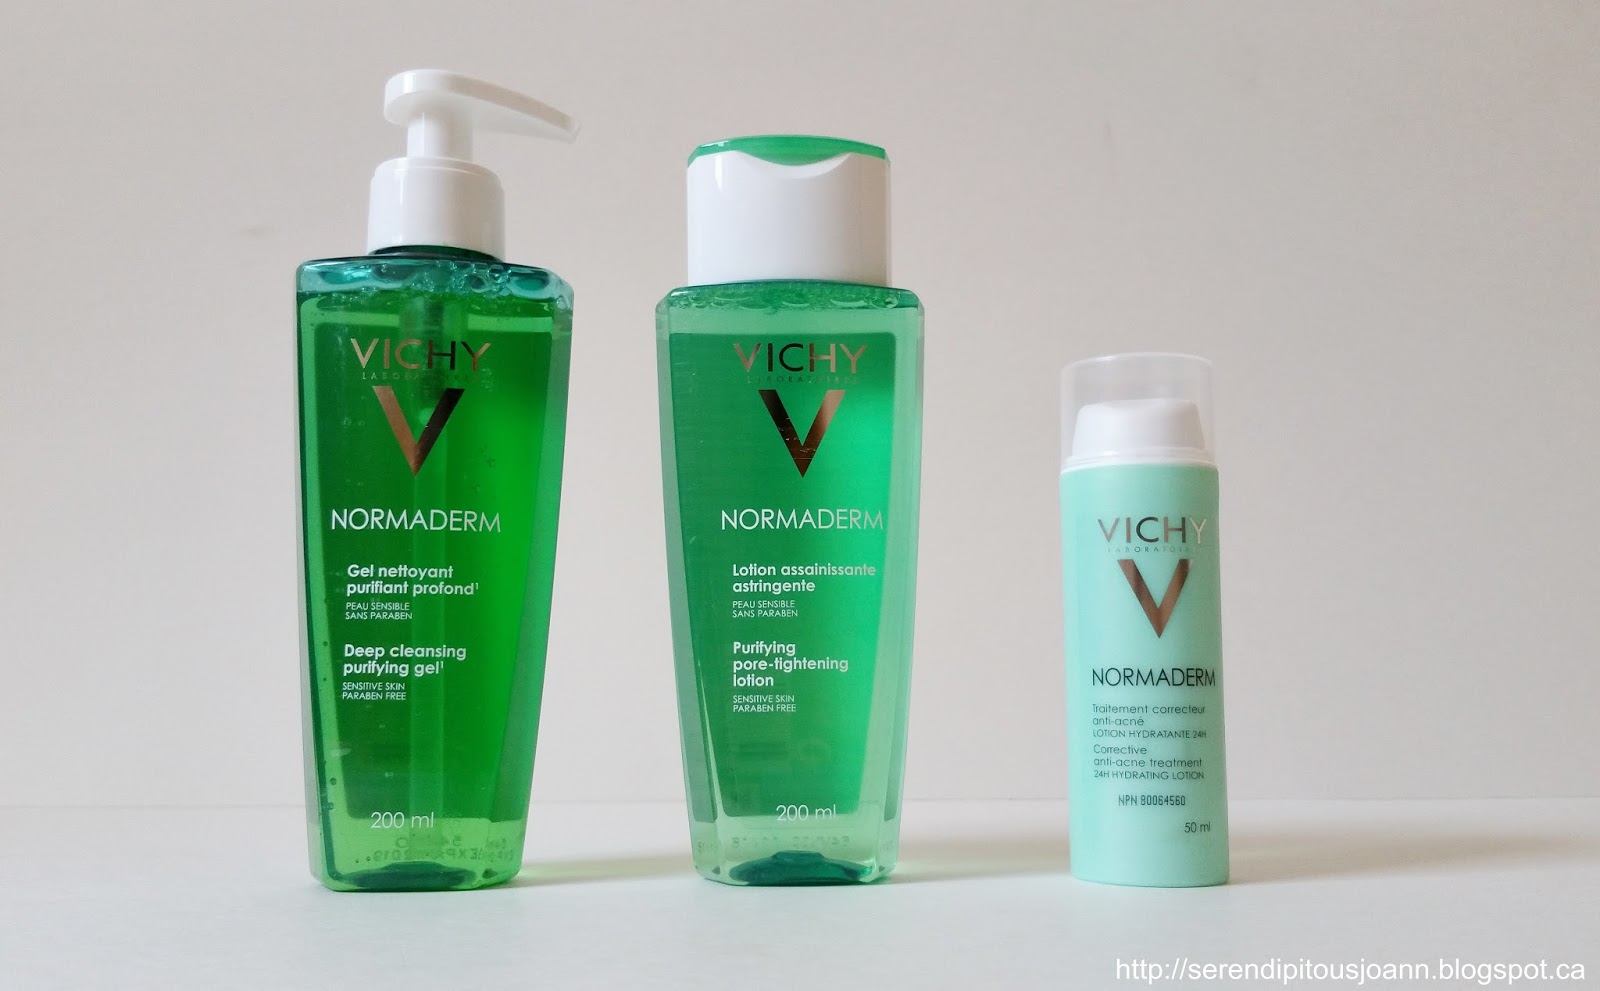 Normaderm gel purifiant. Vichy Normaderm Lotion. Vichy Нормадерм acne prone Skin. Vichy Normaderm Cleanser 3 в 1. Normaderm Gel Cleanser.